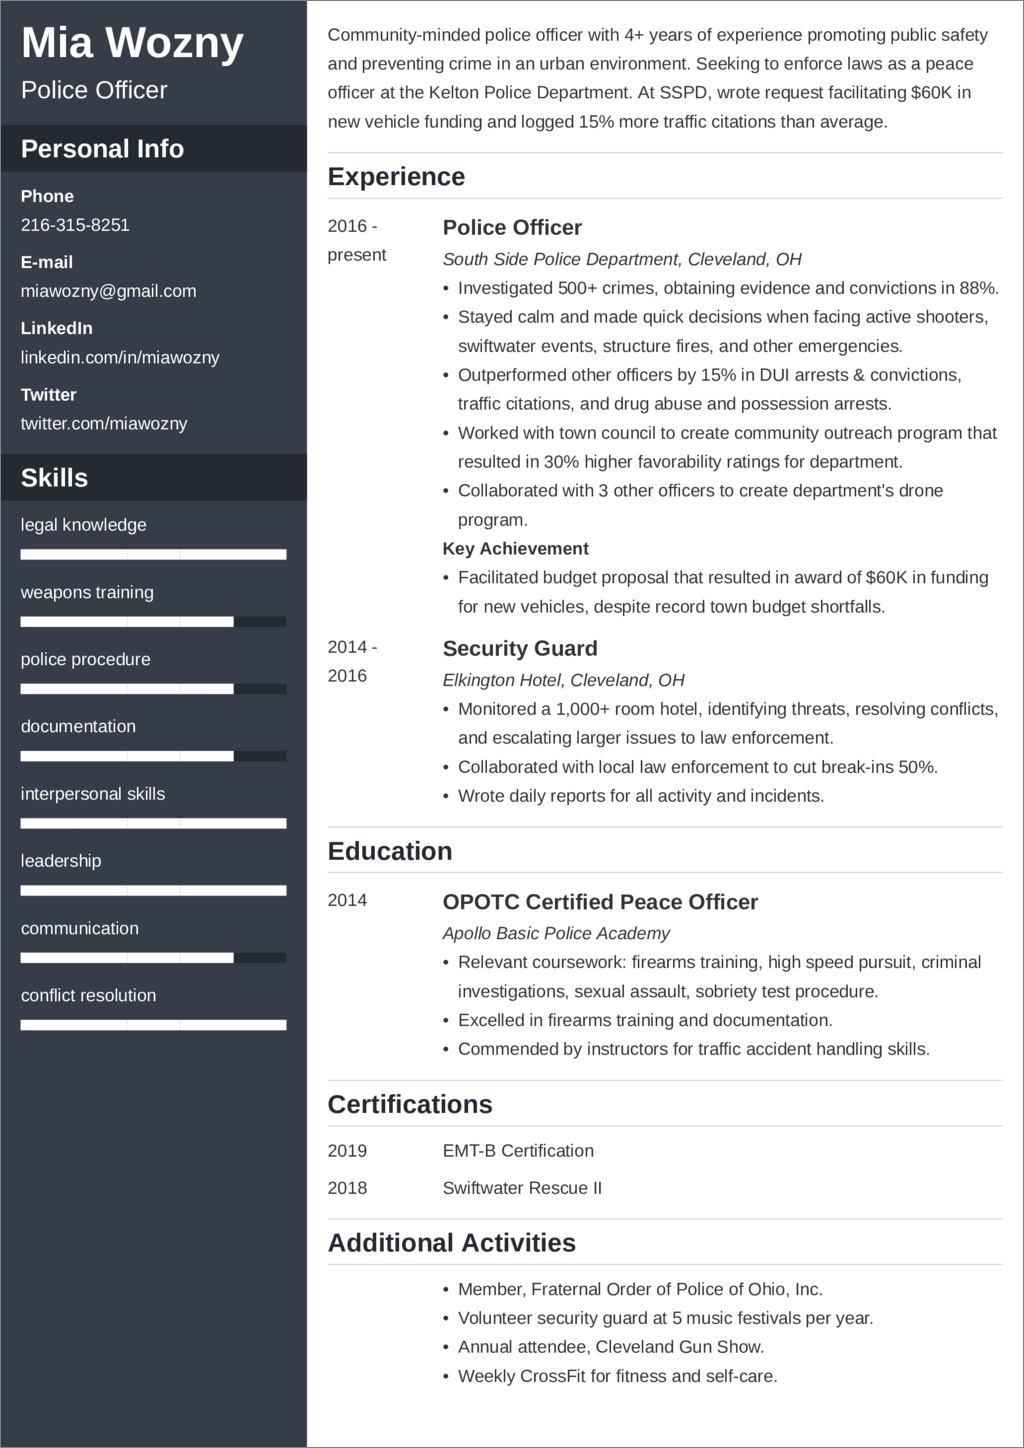 police officer resume—examples objective and skills